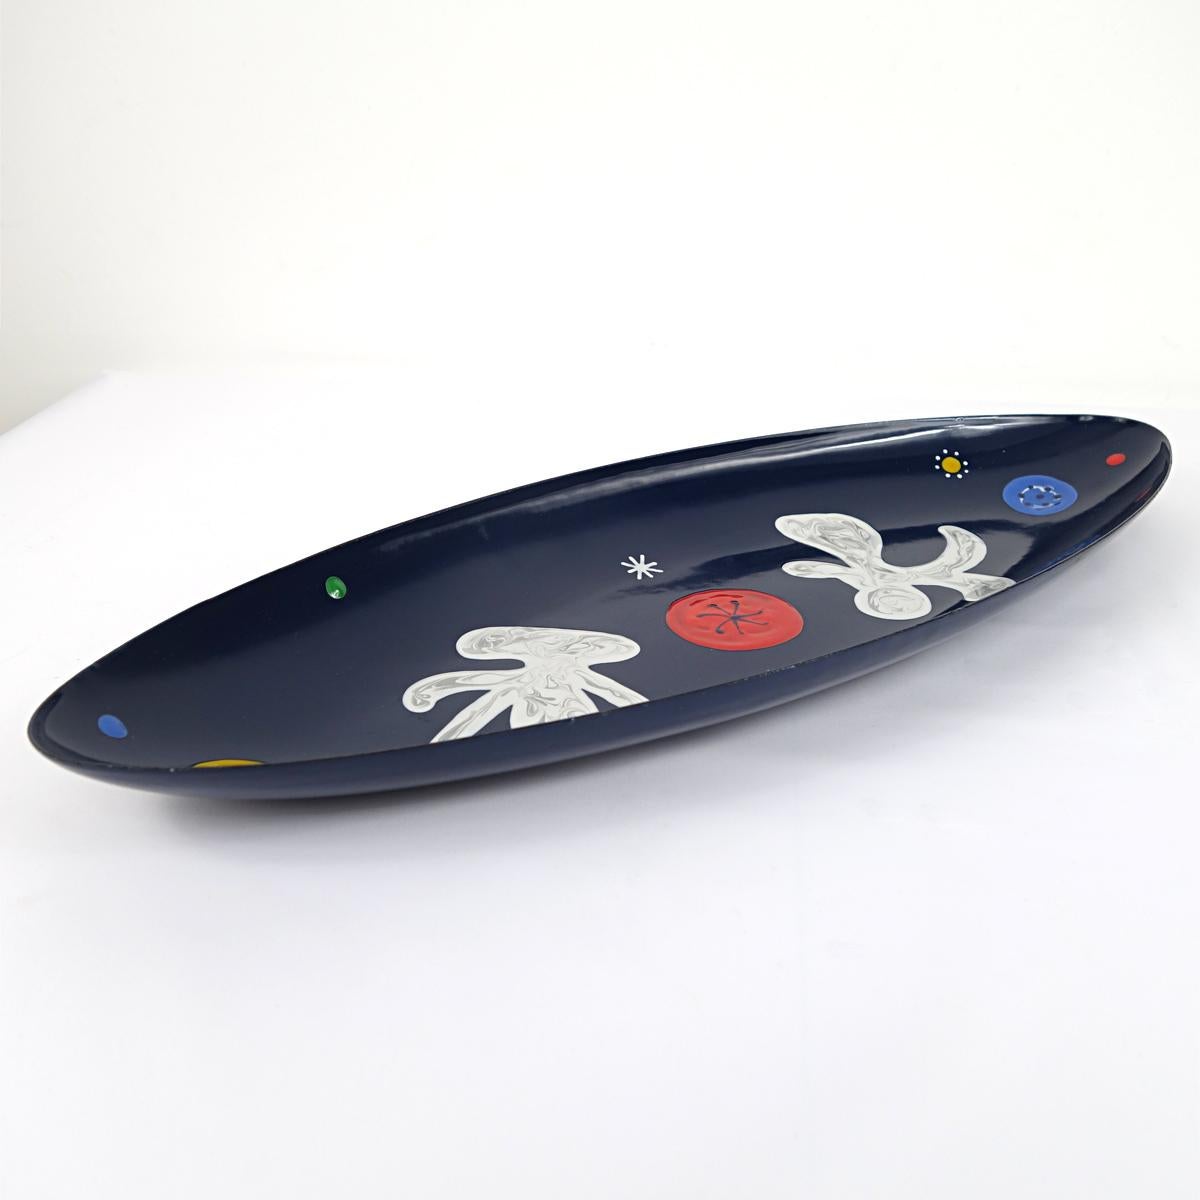 Beautiful blue steel bowl with surreal colorful decorations in virgin white, blood red and jersey yellow.
It was made in the 1950s by A.N.M.B. (Algemene Nederlandse Metaalwerkers Bond, the General Netherlands Steelworkers Union).
Its design is